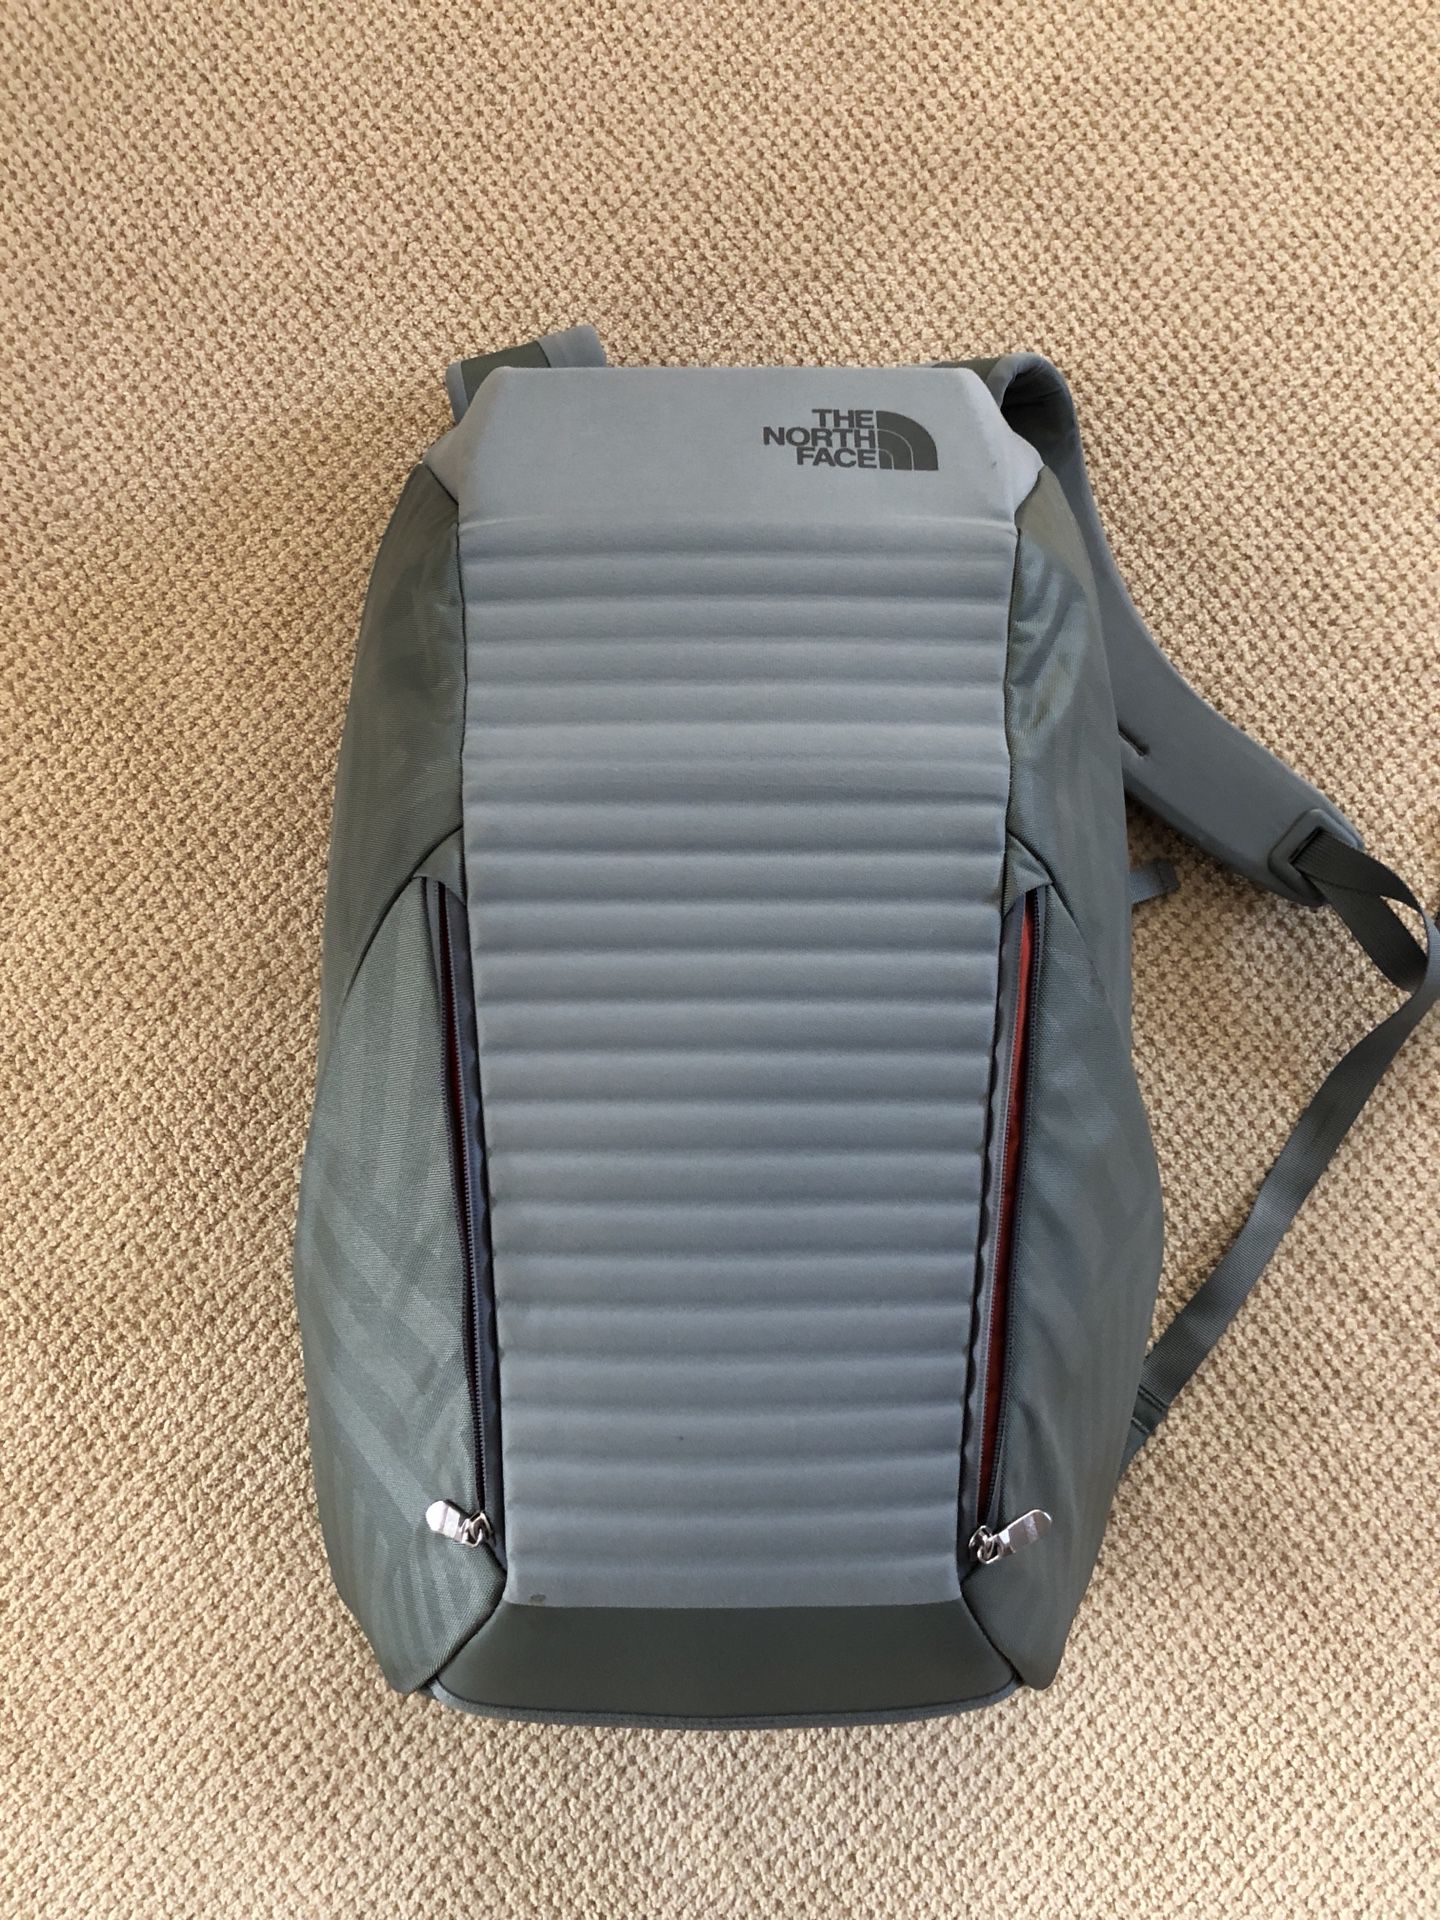 North face Access pack 28l Laptop 15” Backpack